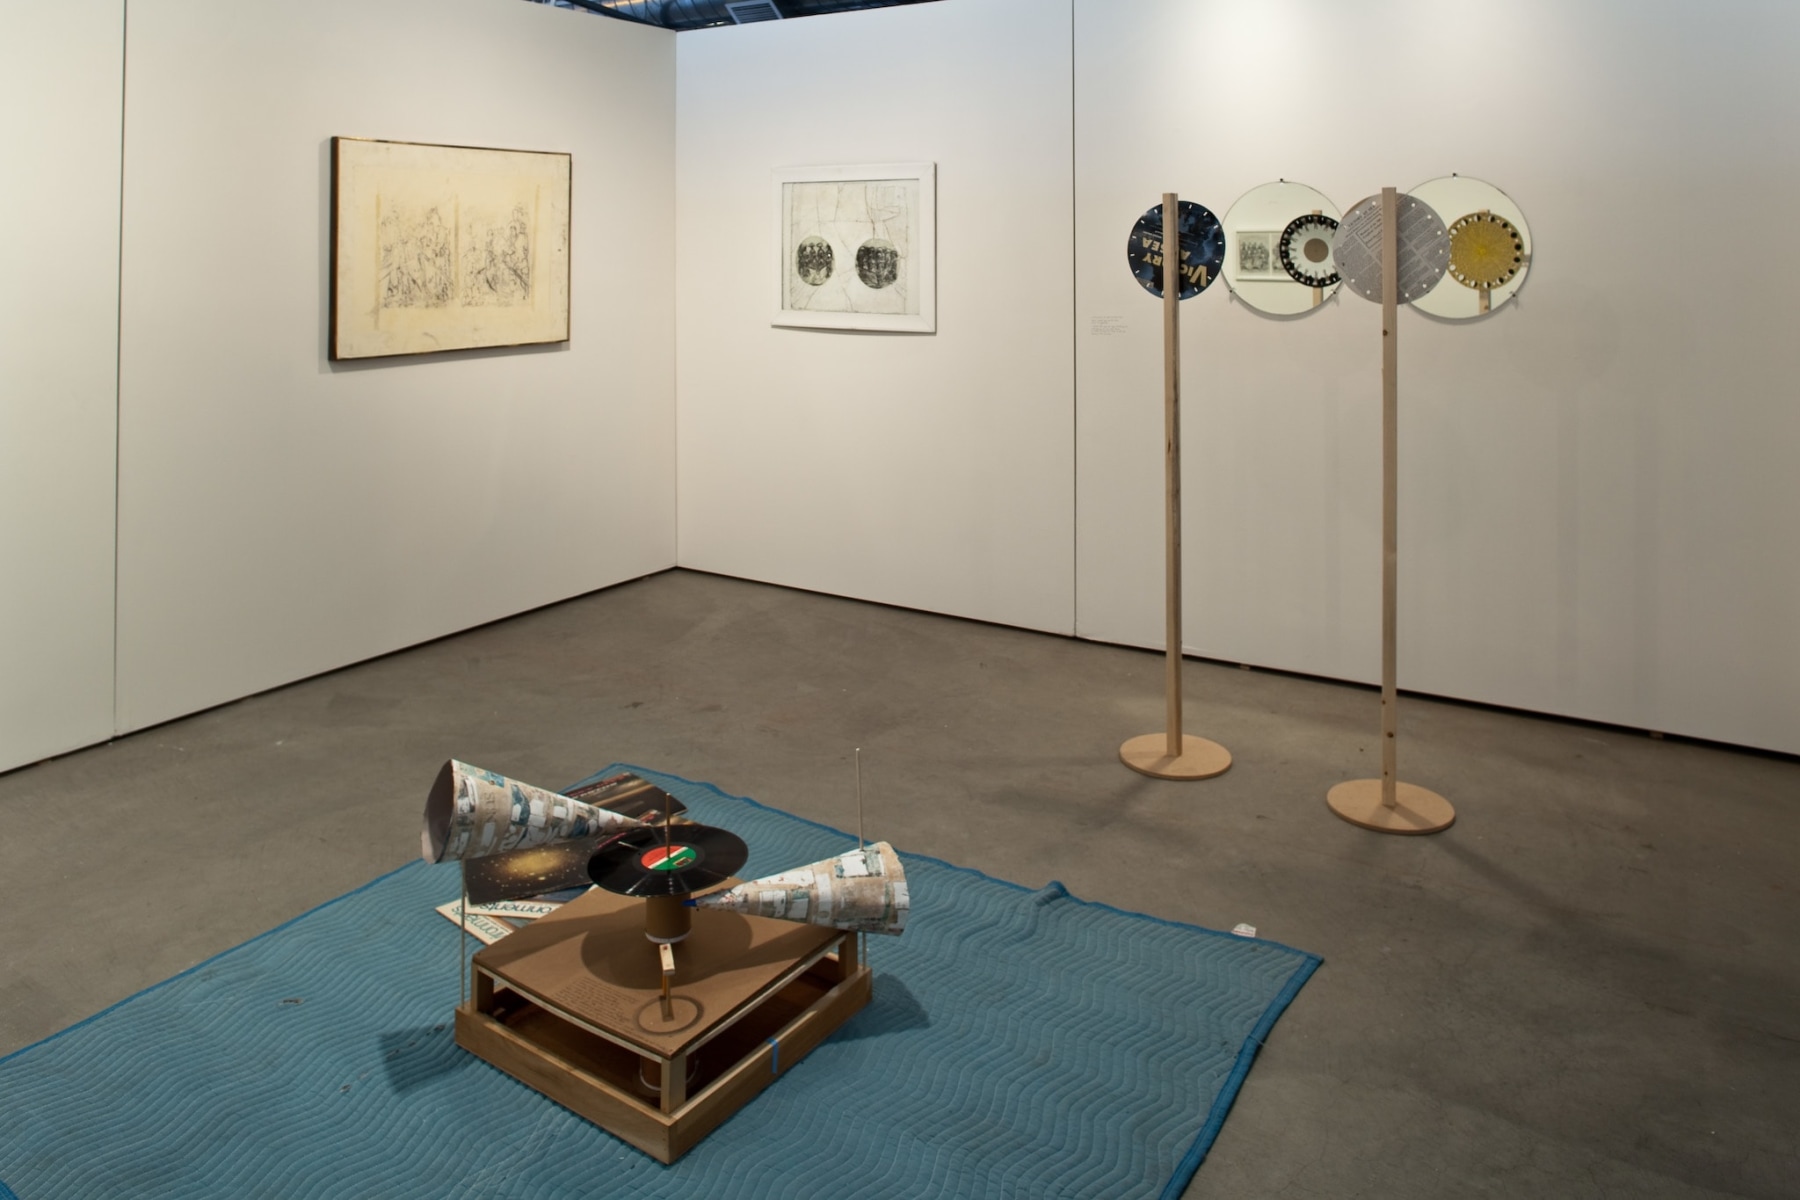 Homemade record player on gallery floor